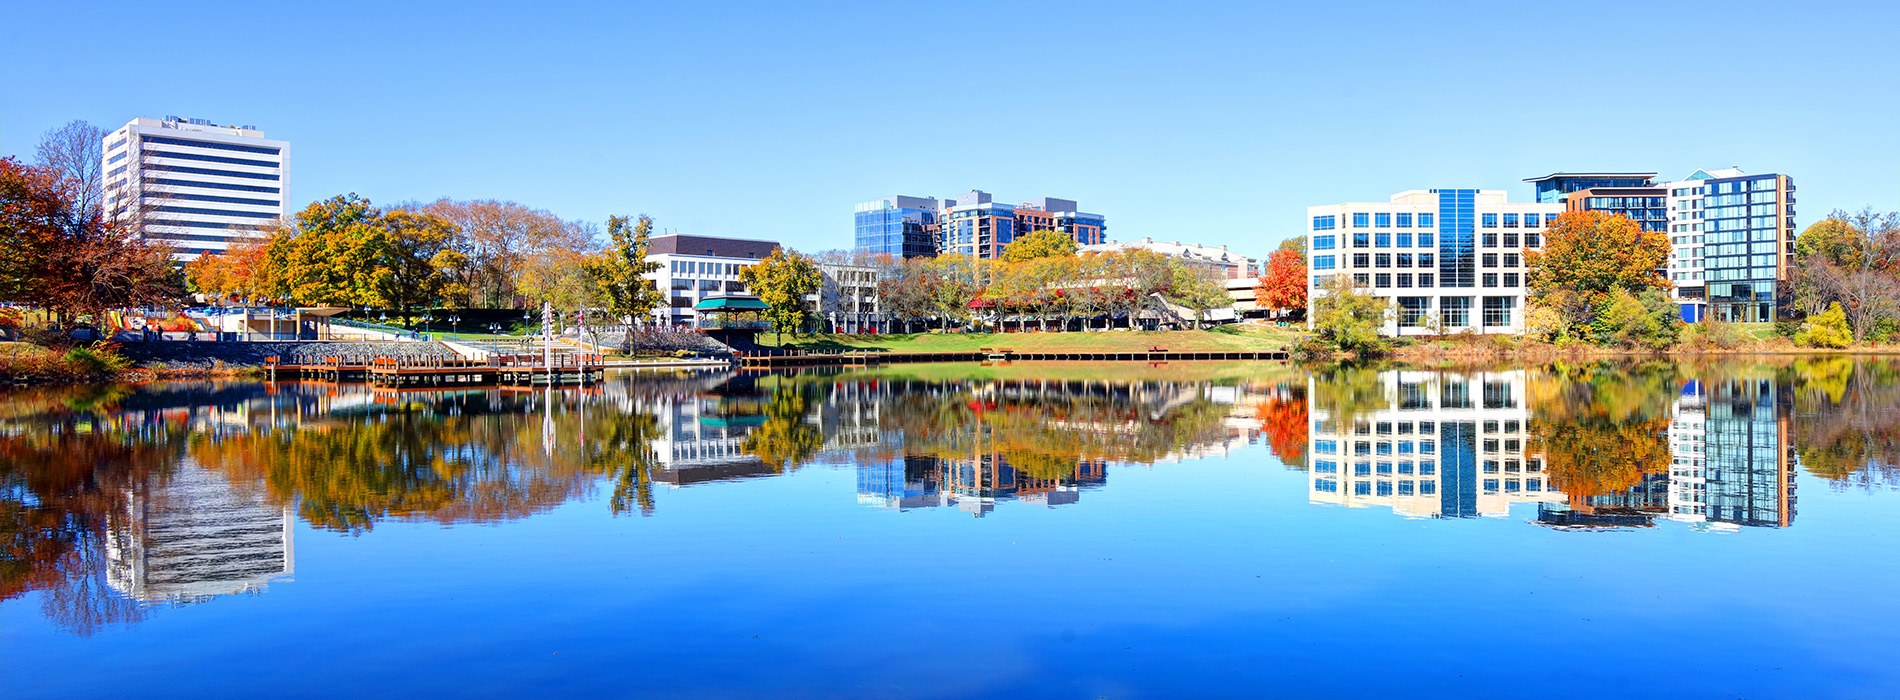 Waterfront view in Columbia, Maryland